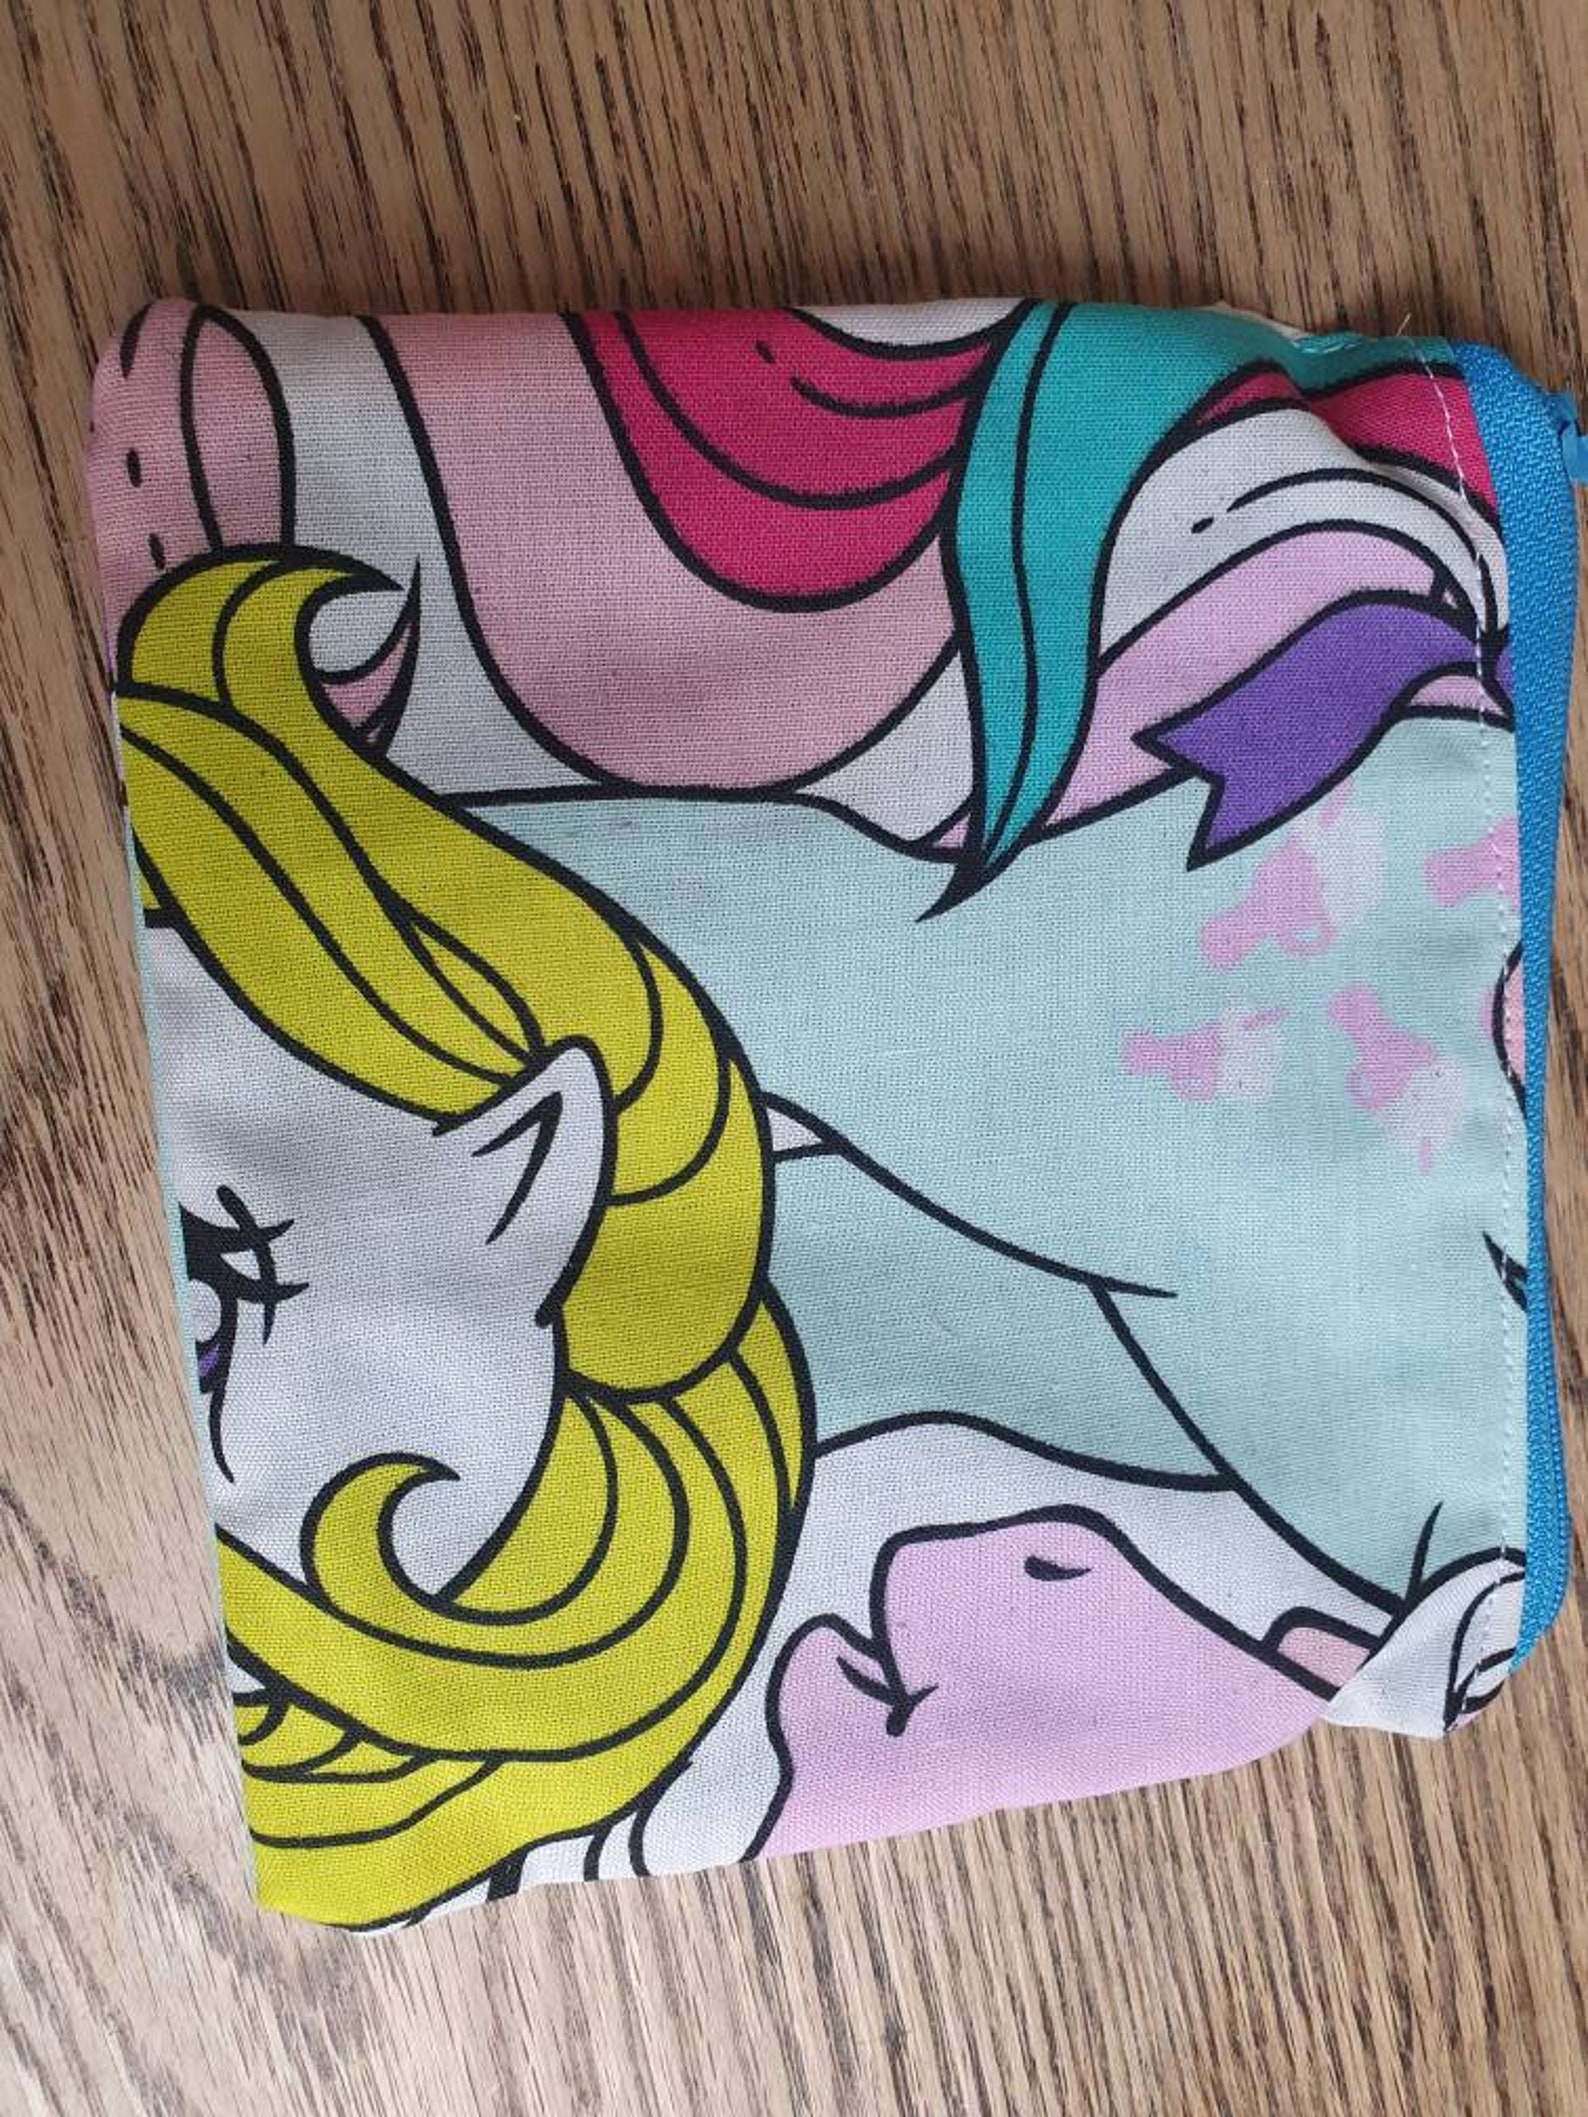 Cosmetic bag Make up Bag pencil case storage My Little Pony | Etsy